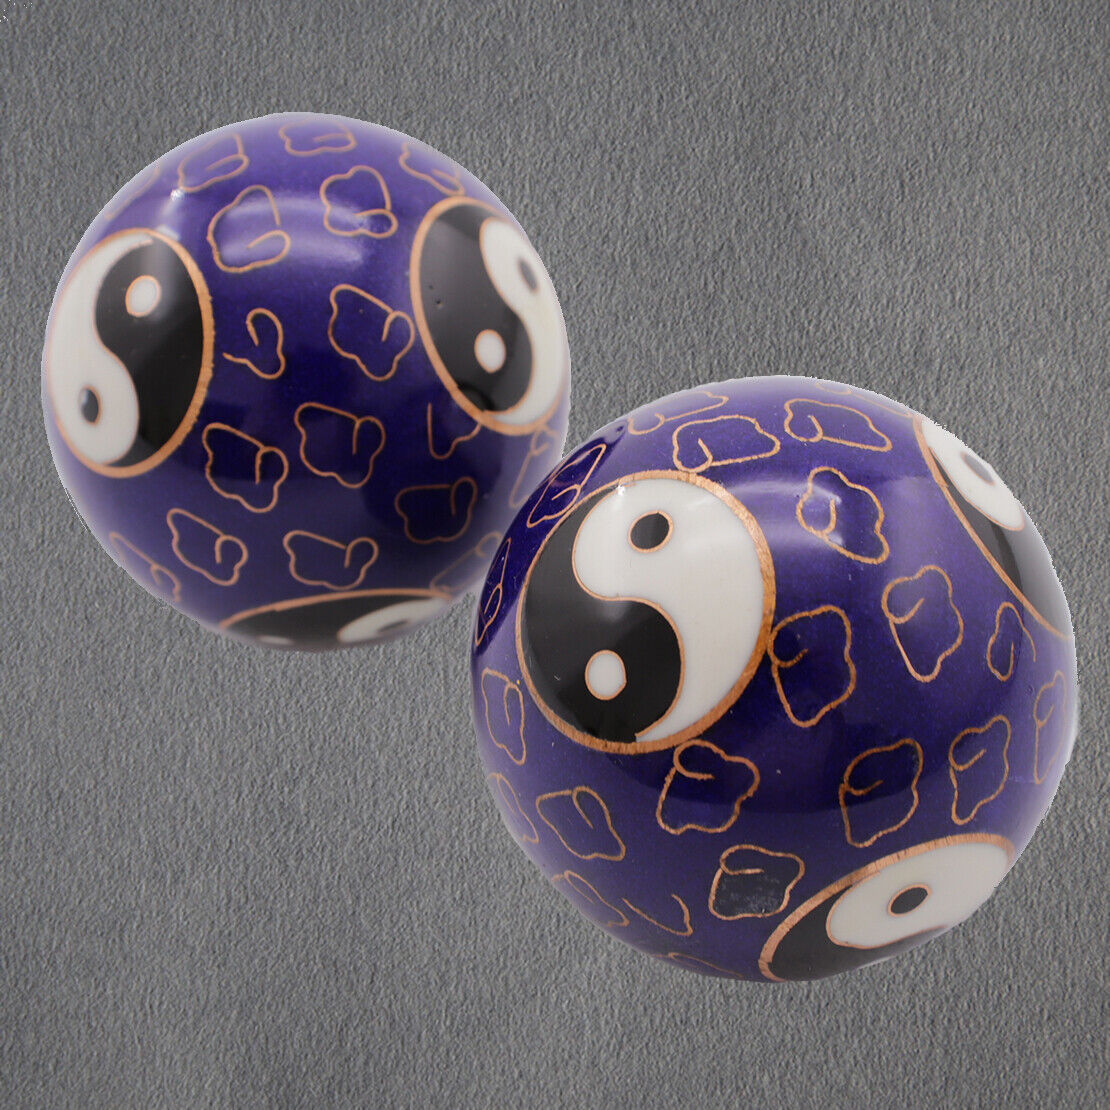 2x 50mm Chinese Yin Yang Baoding Balls Health Exercise Relaxation Stress Therapy